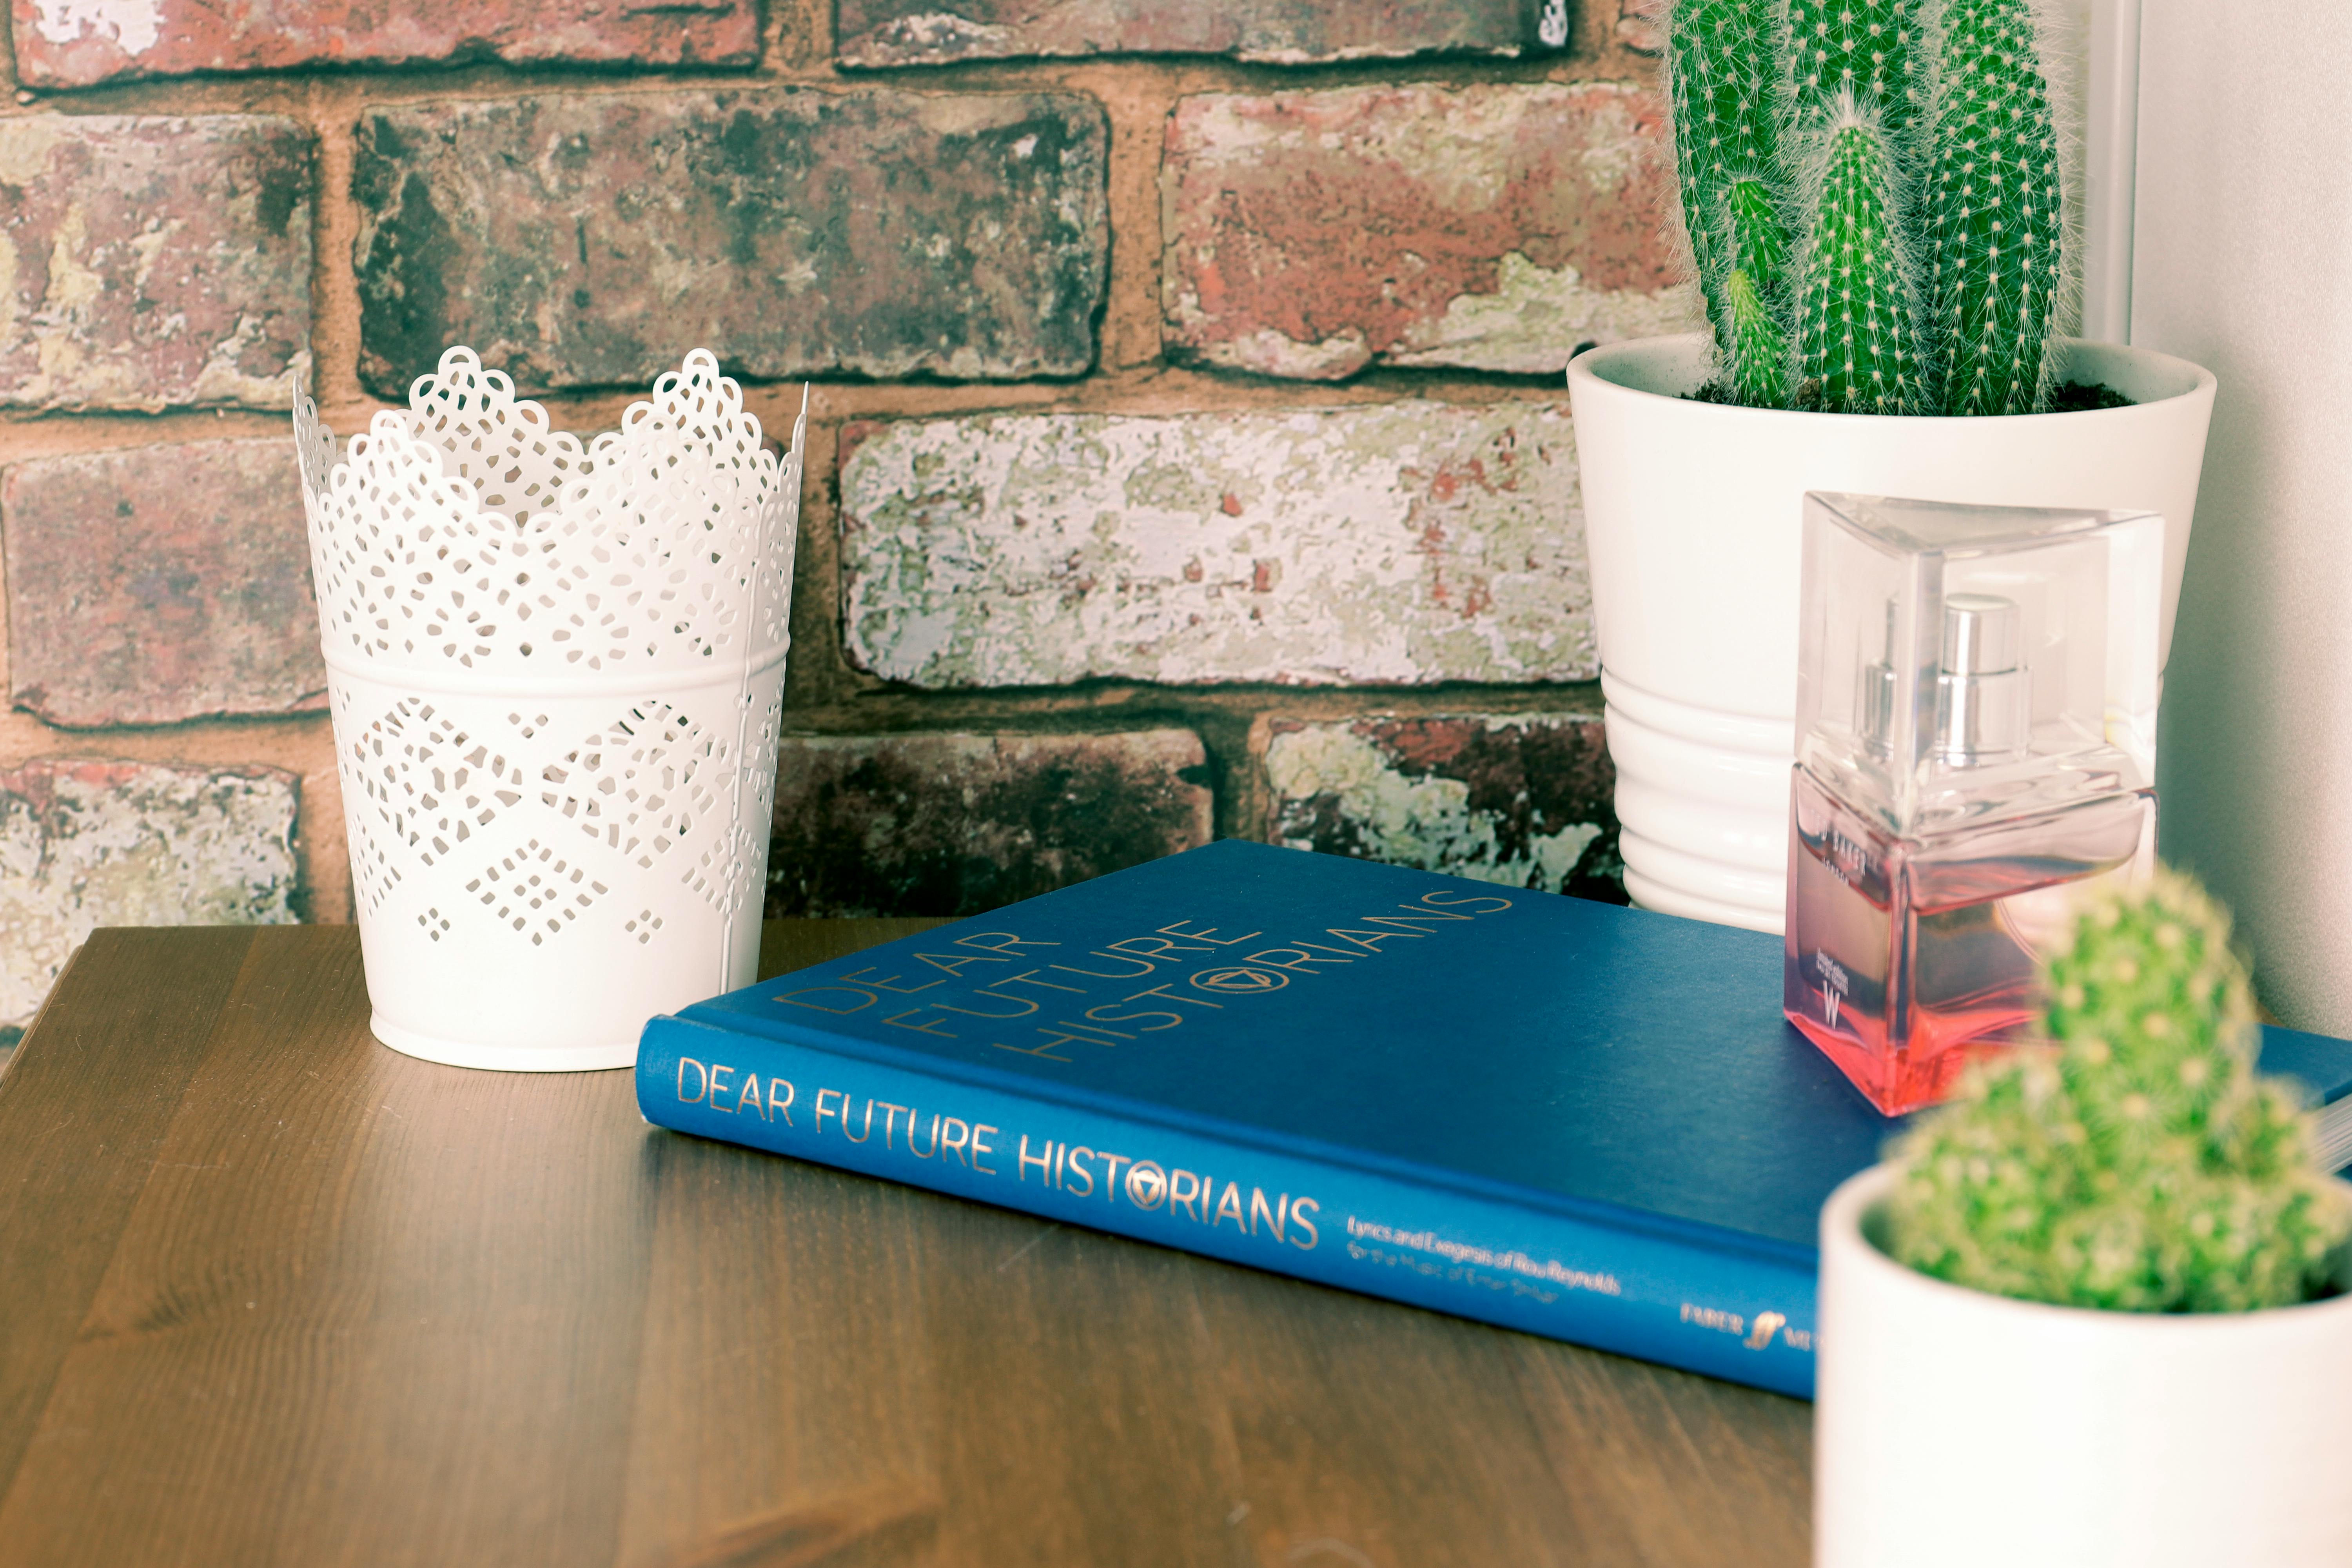 blue book on brown wooden table with flower vases